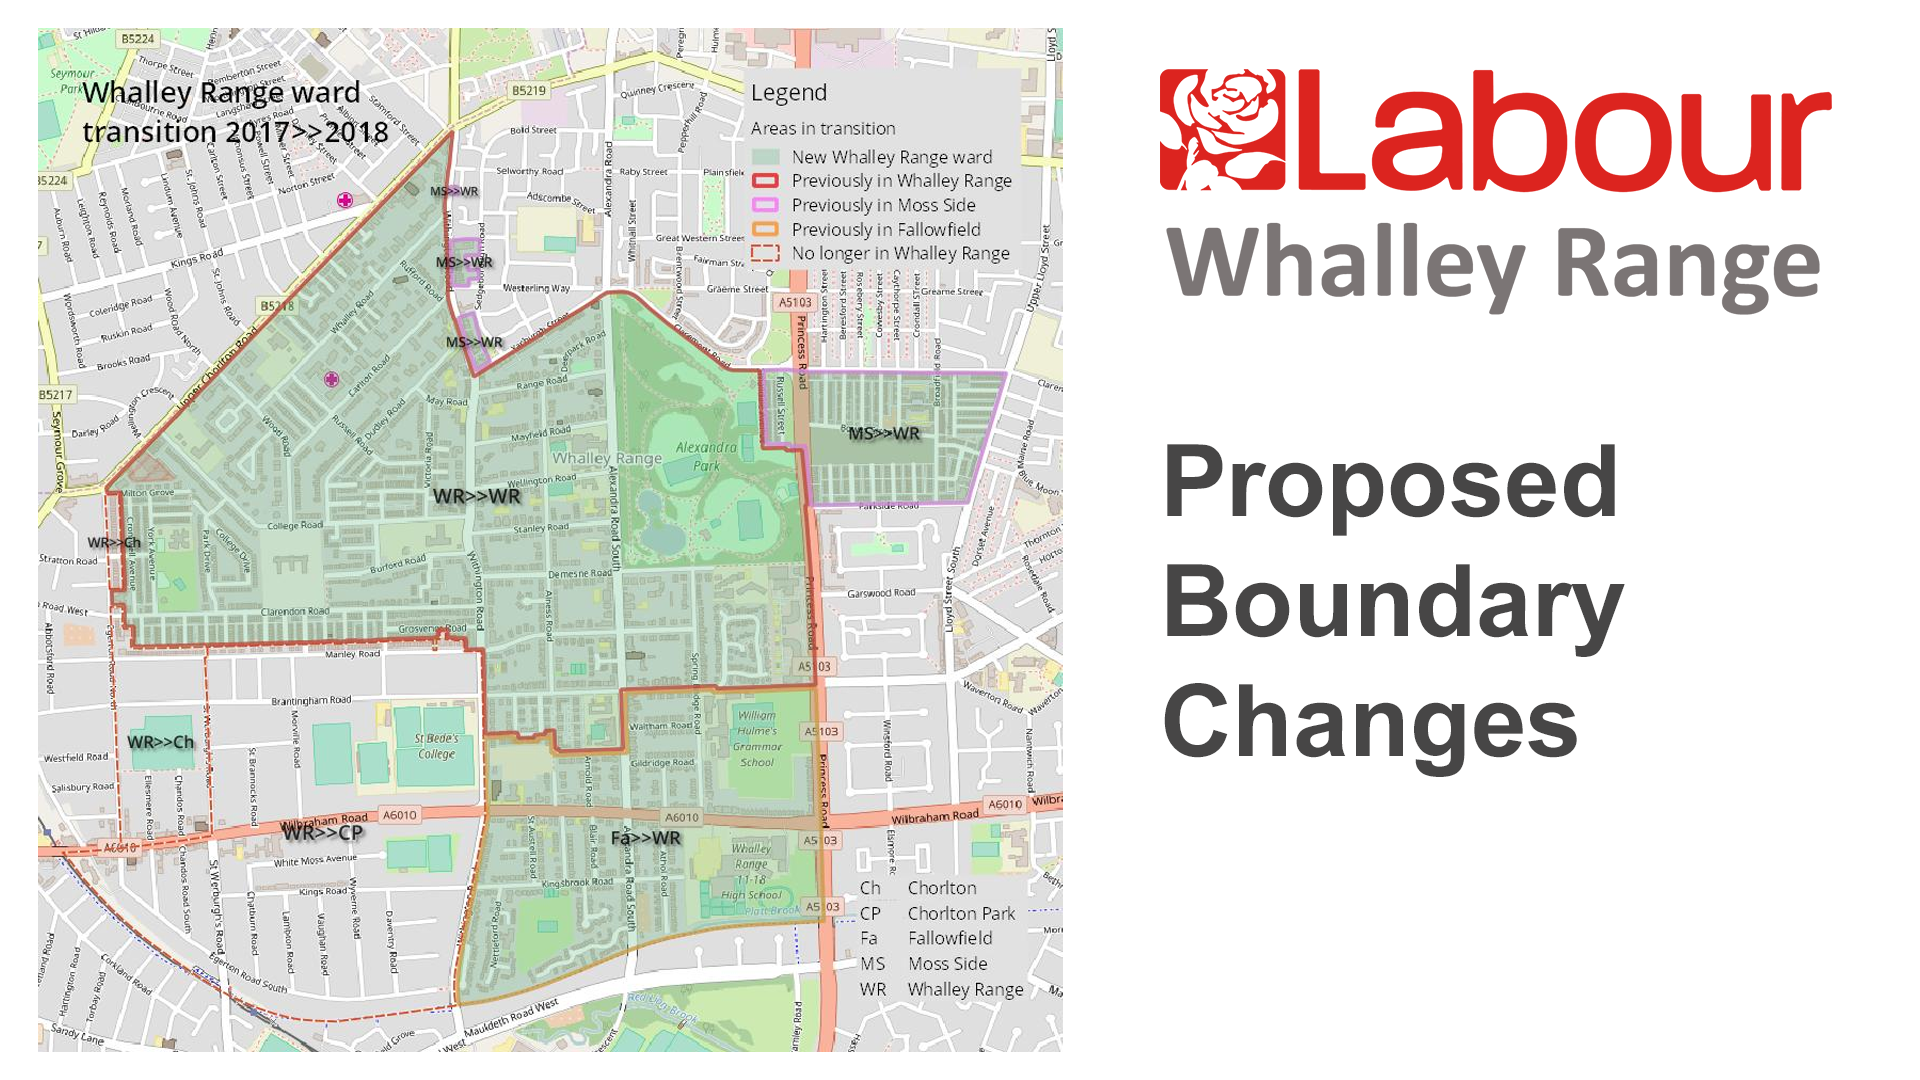 Whalley Range Labour - Whalley Range Proposed Boundary Changes